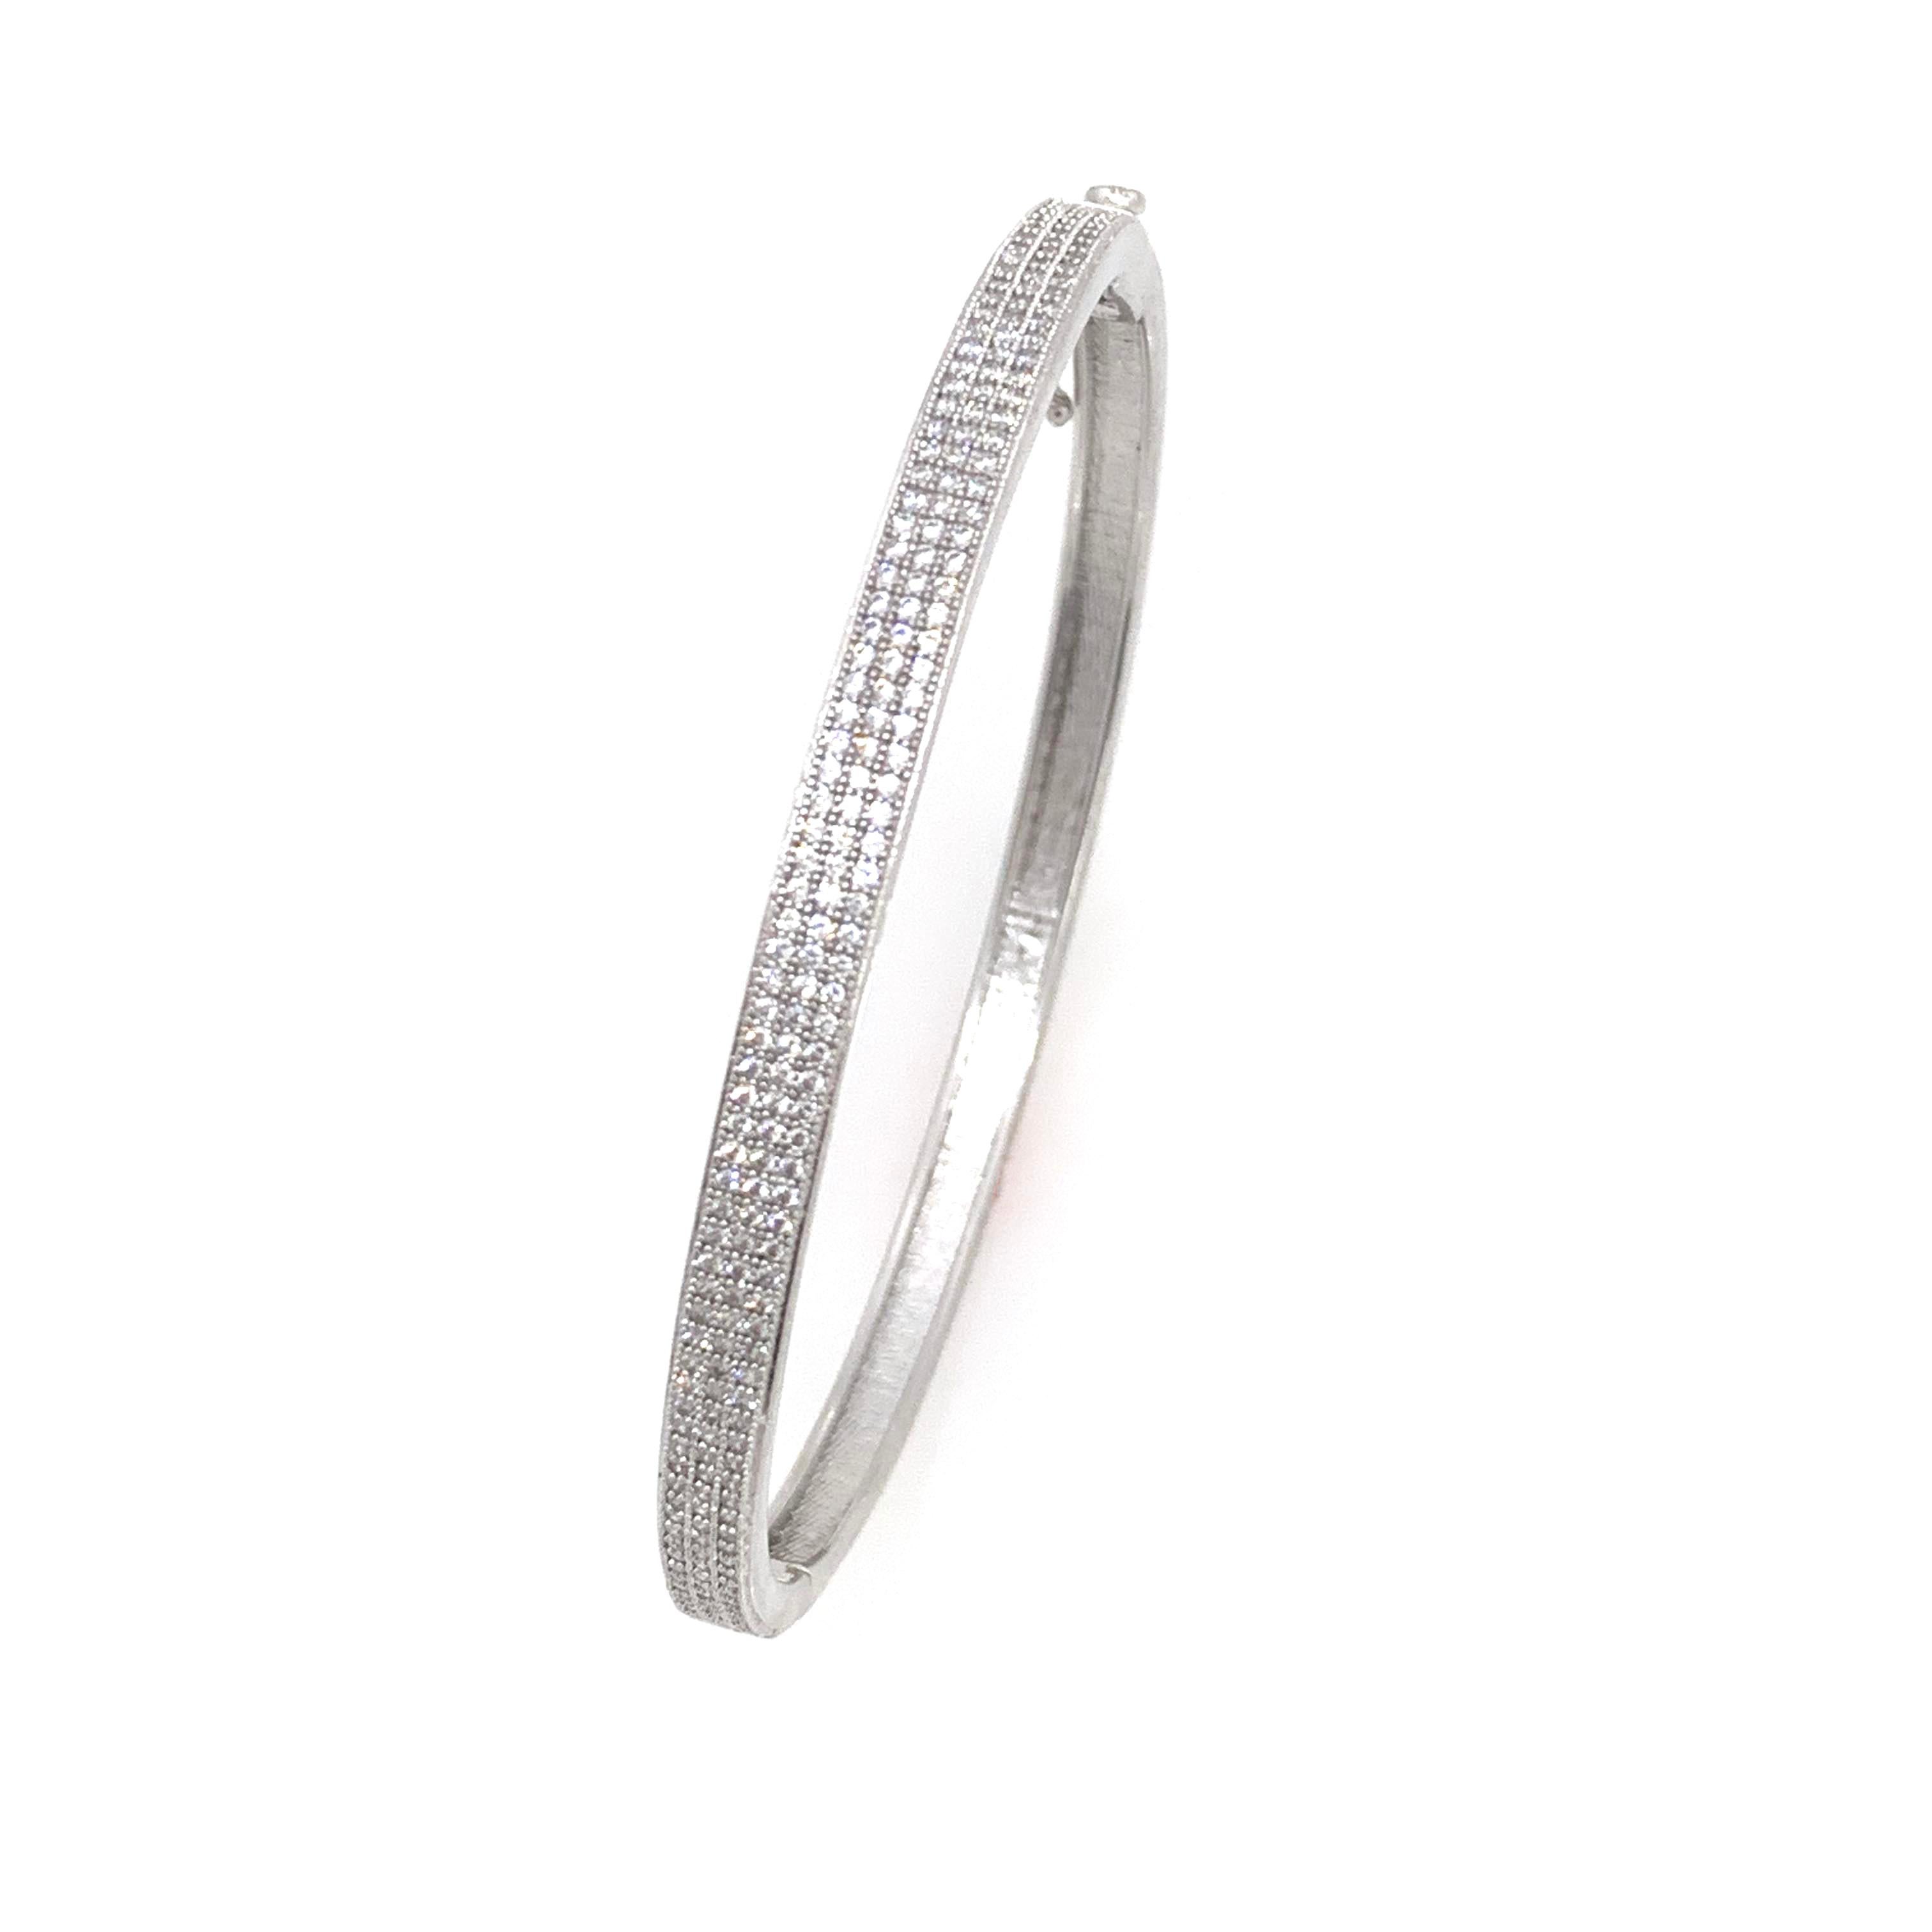 3-row Micropave Simulated Diamond Sterling Silver Bangle Bracelet.

This chic and modern bracelet features over 200 pcs of round simulated diamond, micro set on platinum rhodium plated sterling silver, push clasp closure and ‘8’ safety lock. The